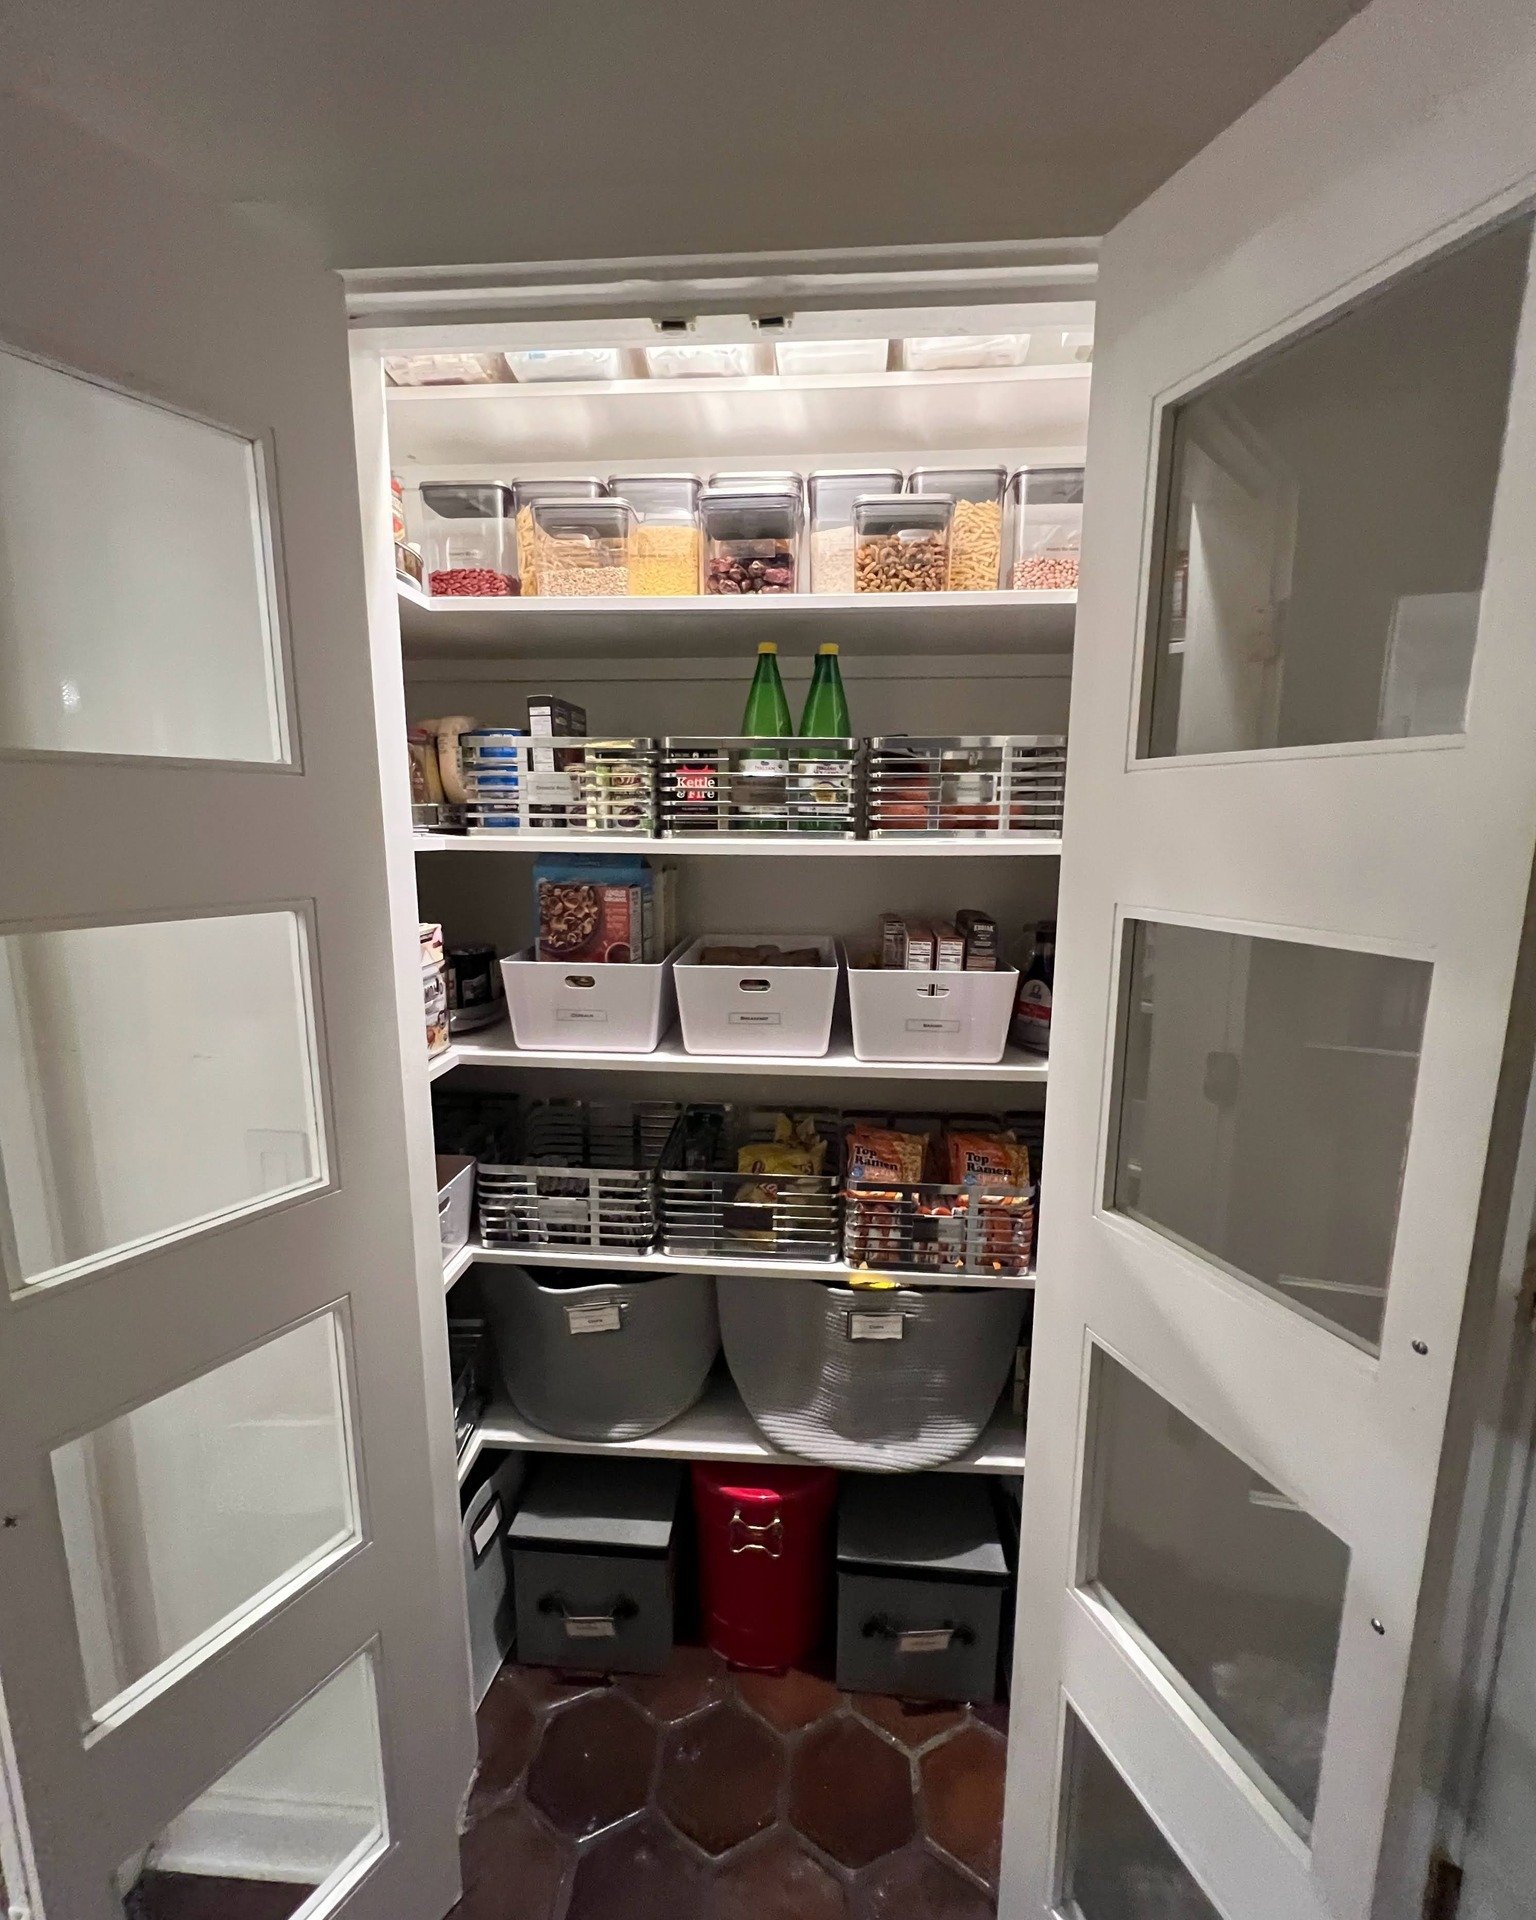 Does your pantry need a refresh? Here are 3 quick tips to help you optimize space and hopefully bring a little order to your pantry space. 

1. Use Vertical Space: Install stackable shelves and hang organizers on the back of the door to maximize ever